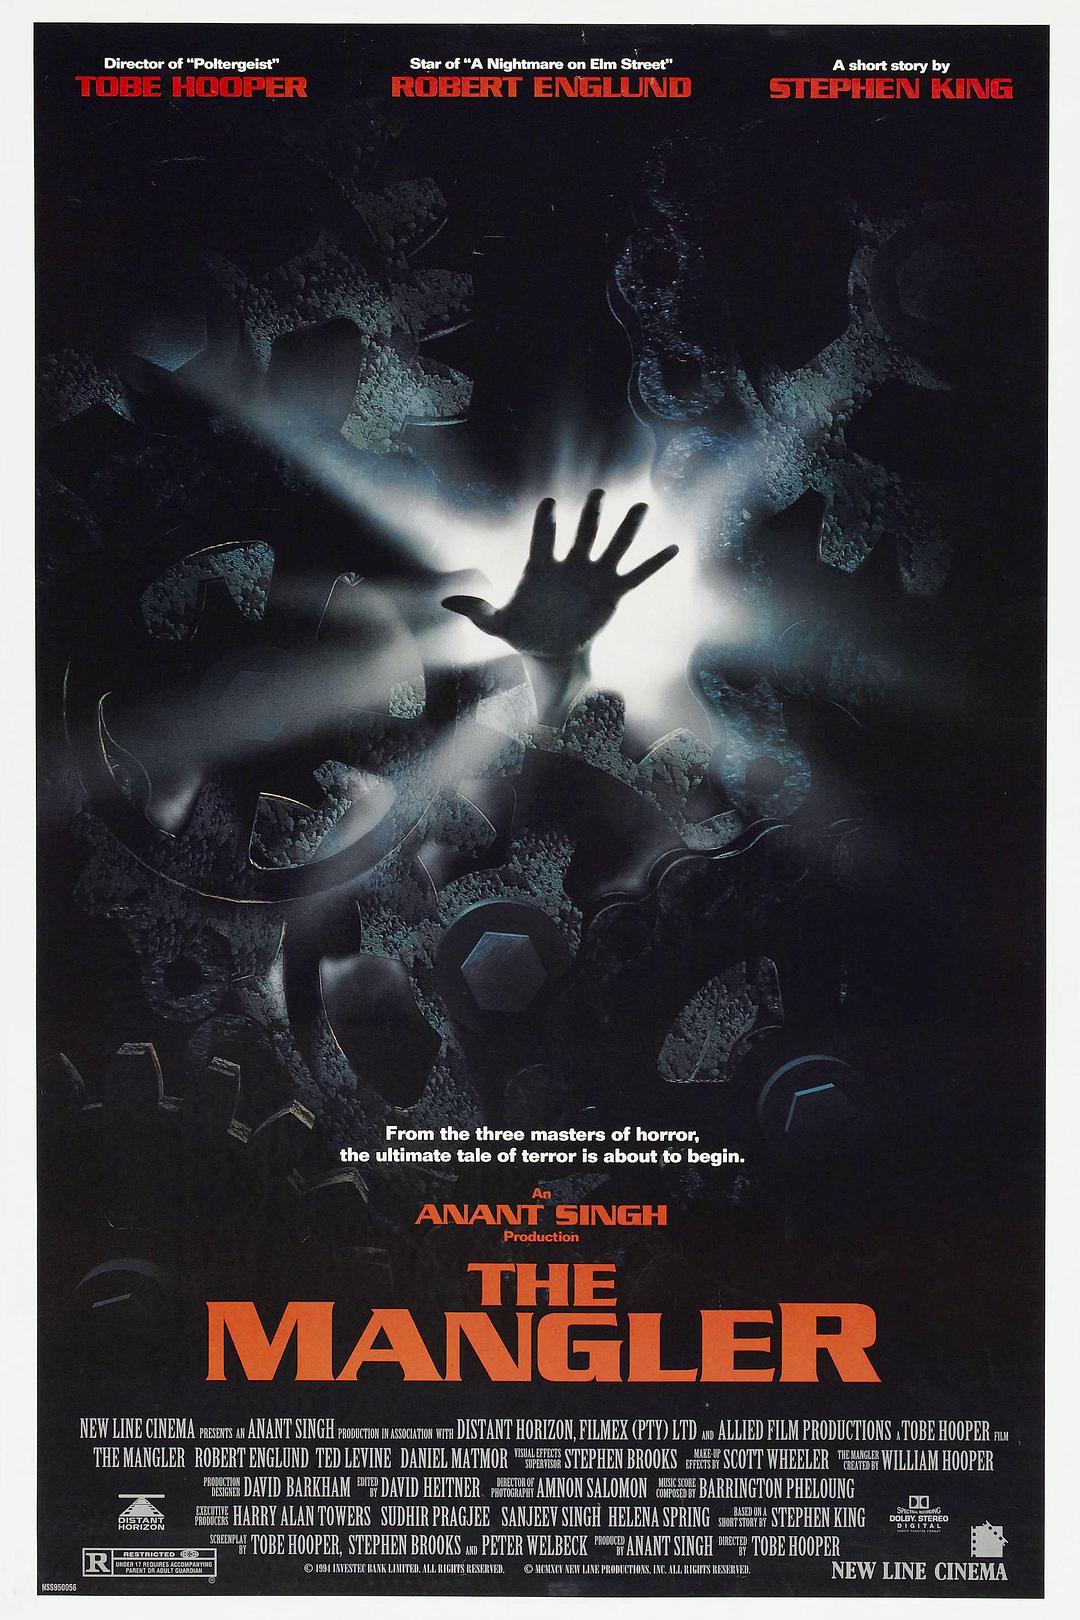 /Ѫħ The.Mangler.1995.REMASTERED.720p.BluRay.x264-PHASE 5.47GB-1.png